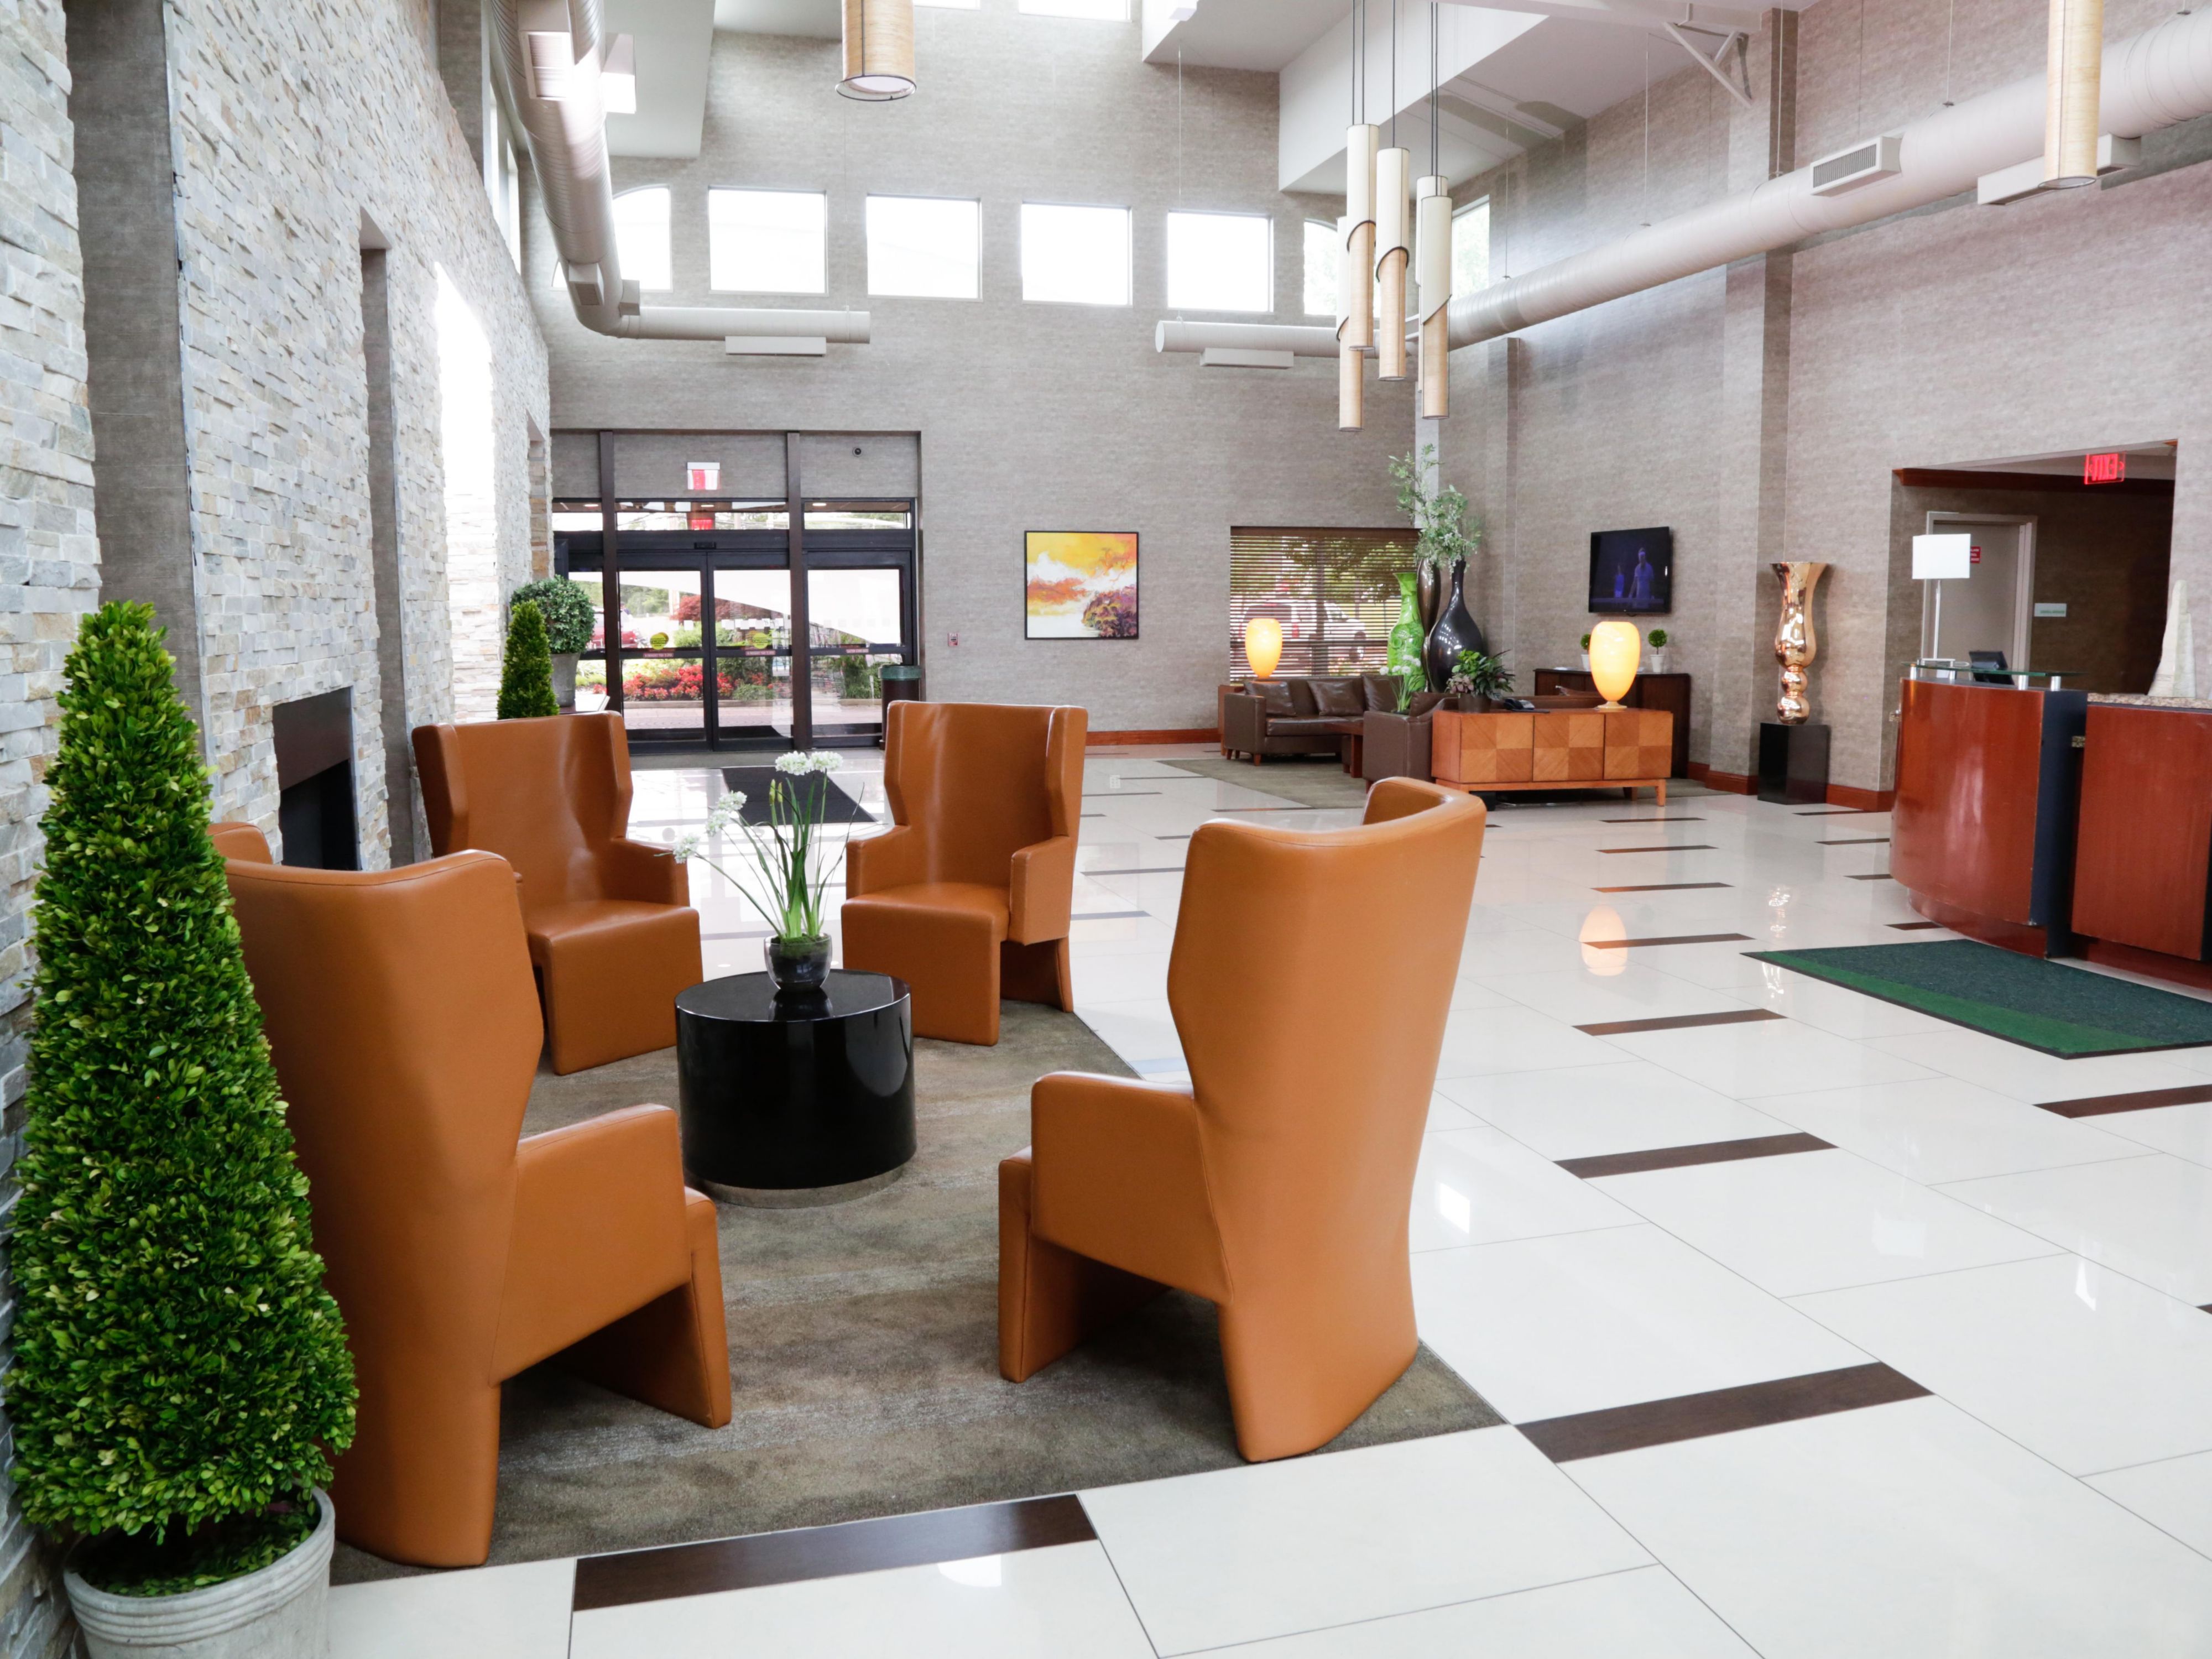 Enjoy our open lobby concept, designed to give you space to work, play or connect with friends, colleagues and family.  Have a drink, a bite to eat or just relax.